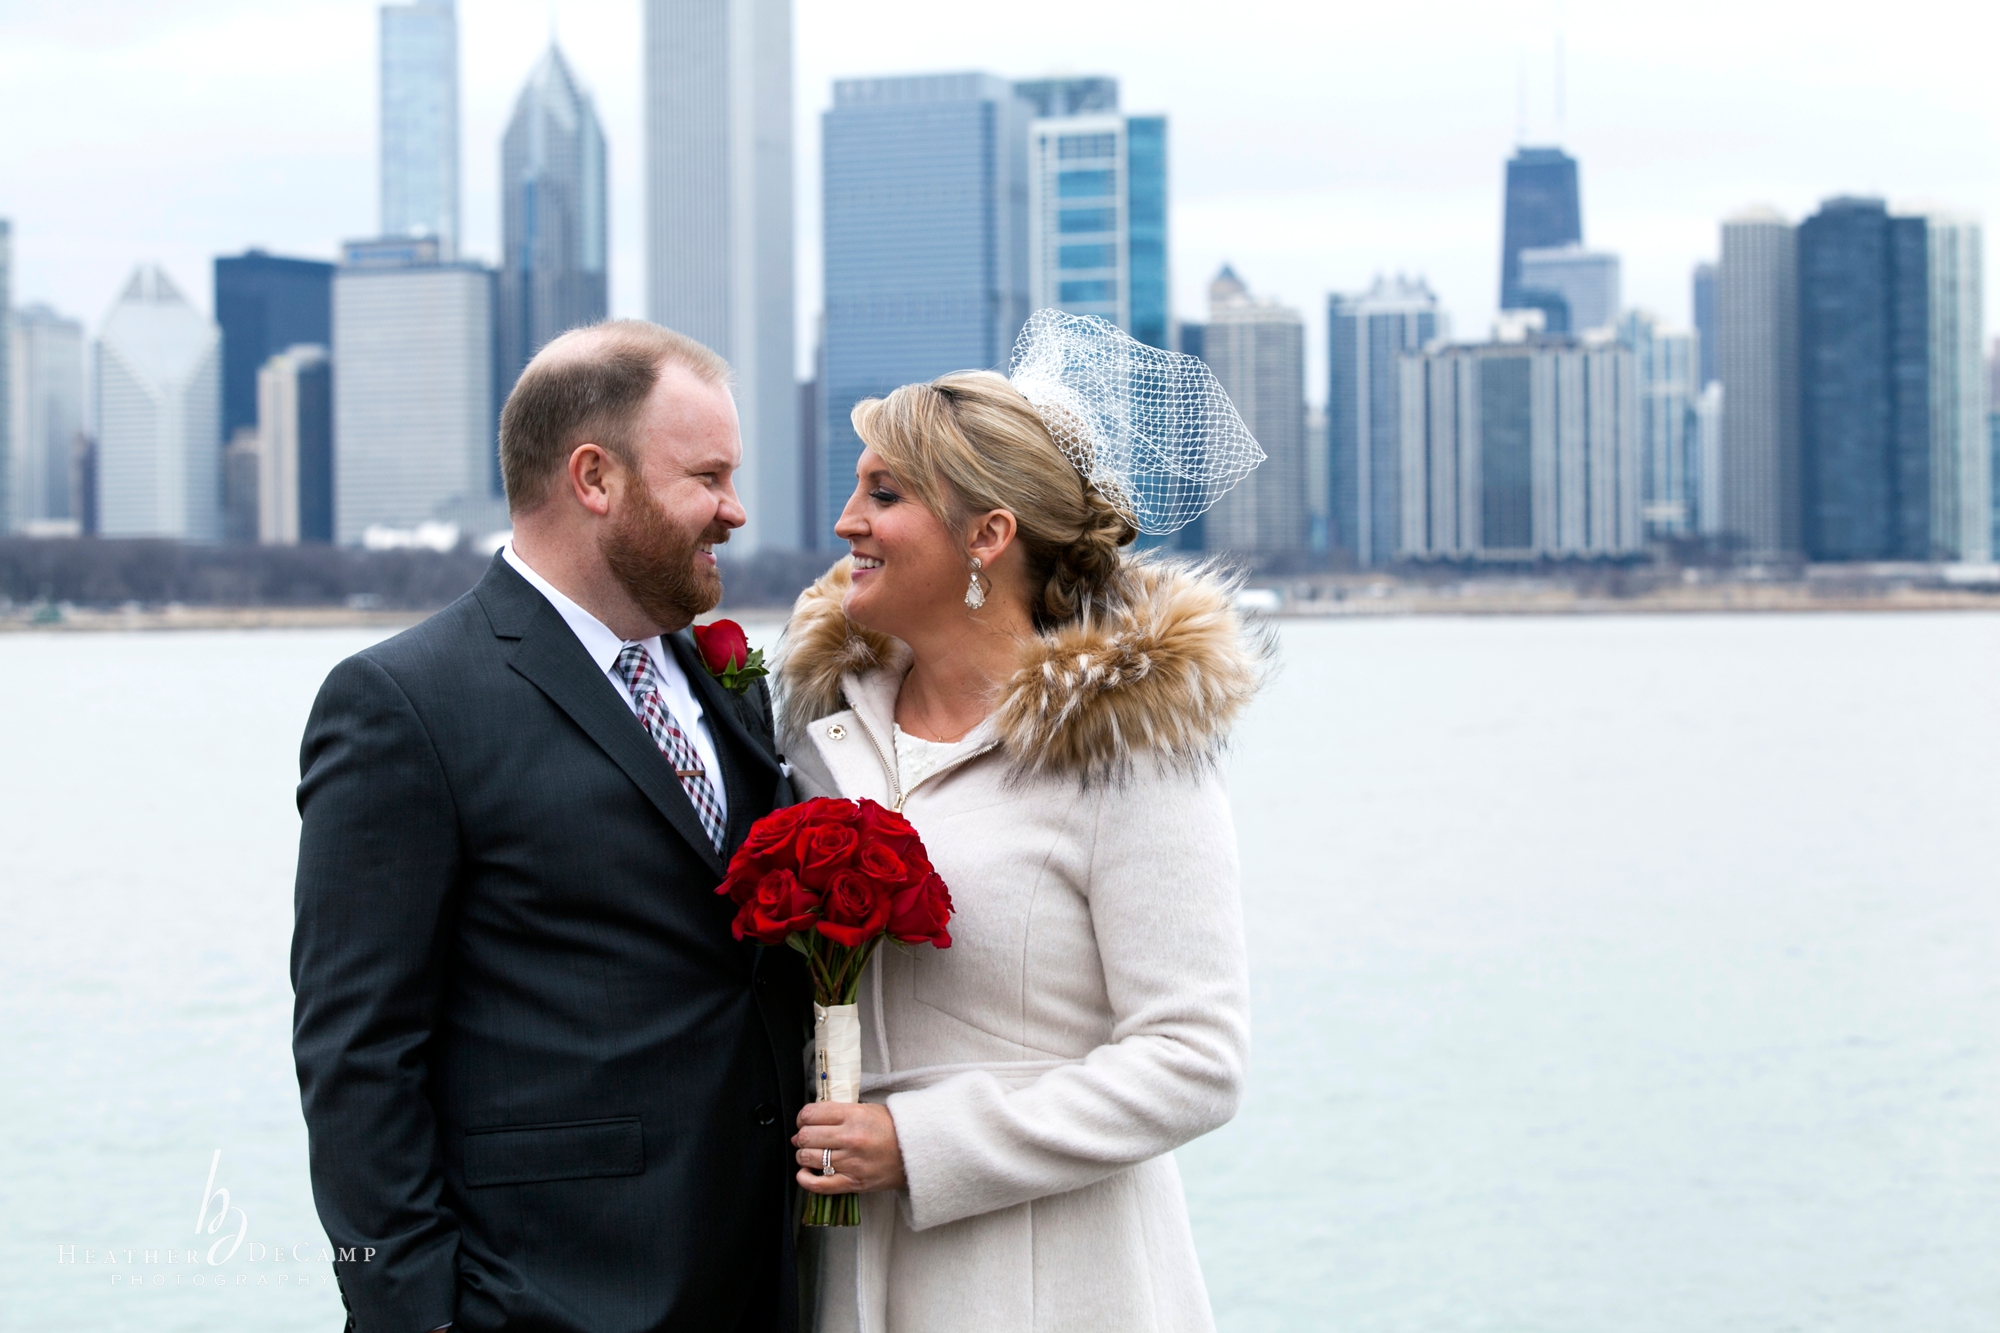 Heather DeCamp is a chicago wedding photographer at Chicago City Hall Wedding Elopement